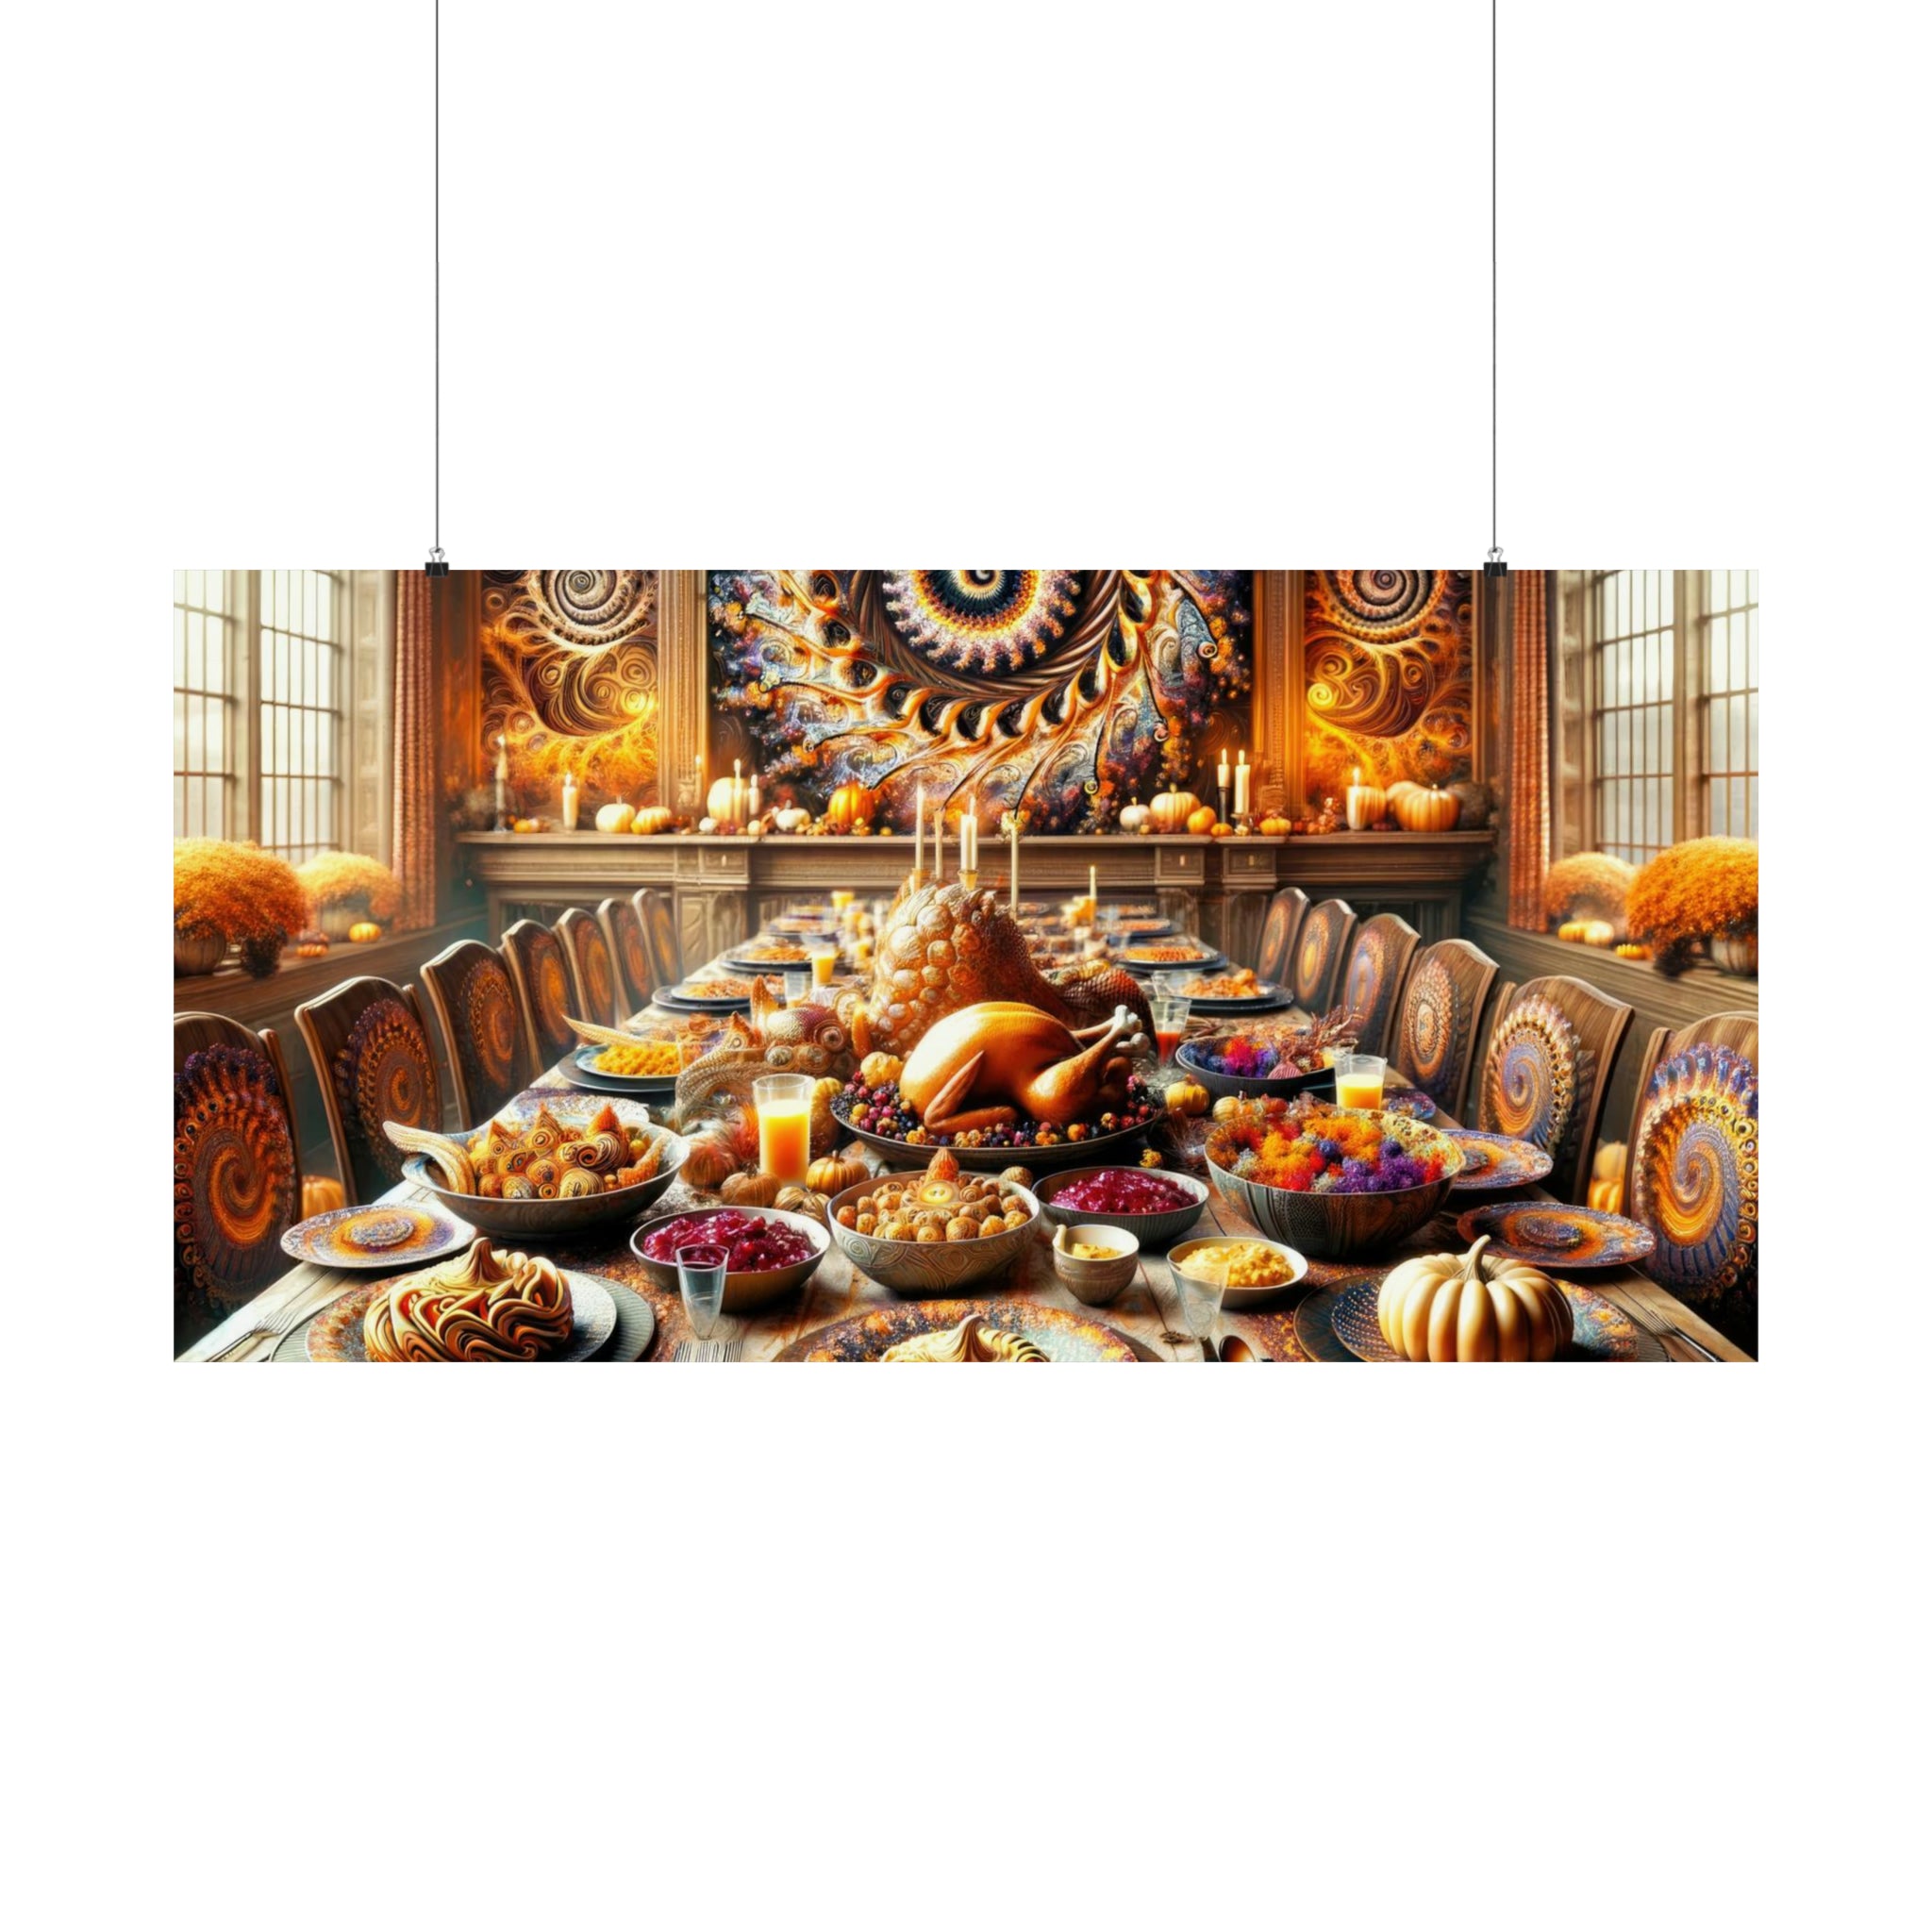 Harvest in the Hall of Spirals Poster